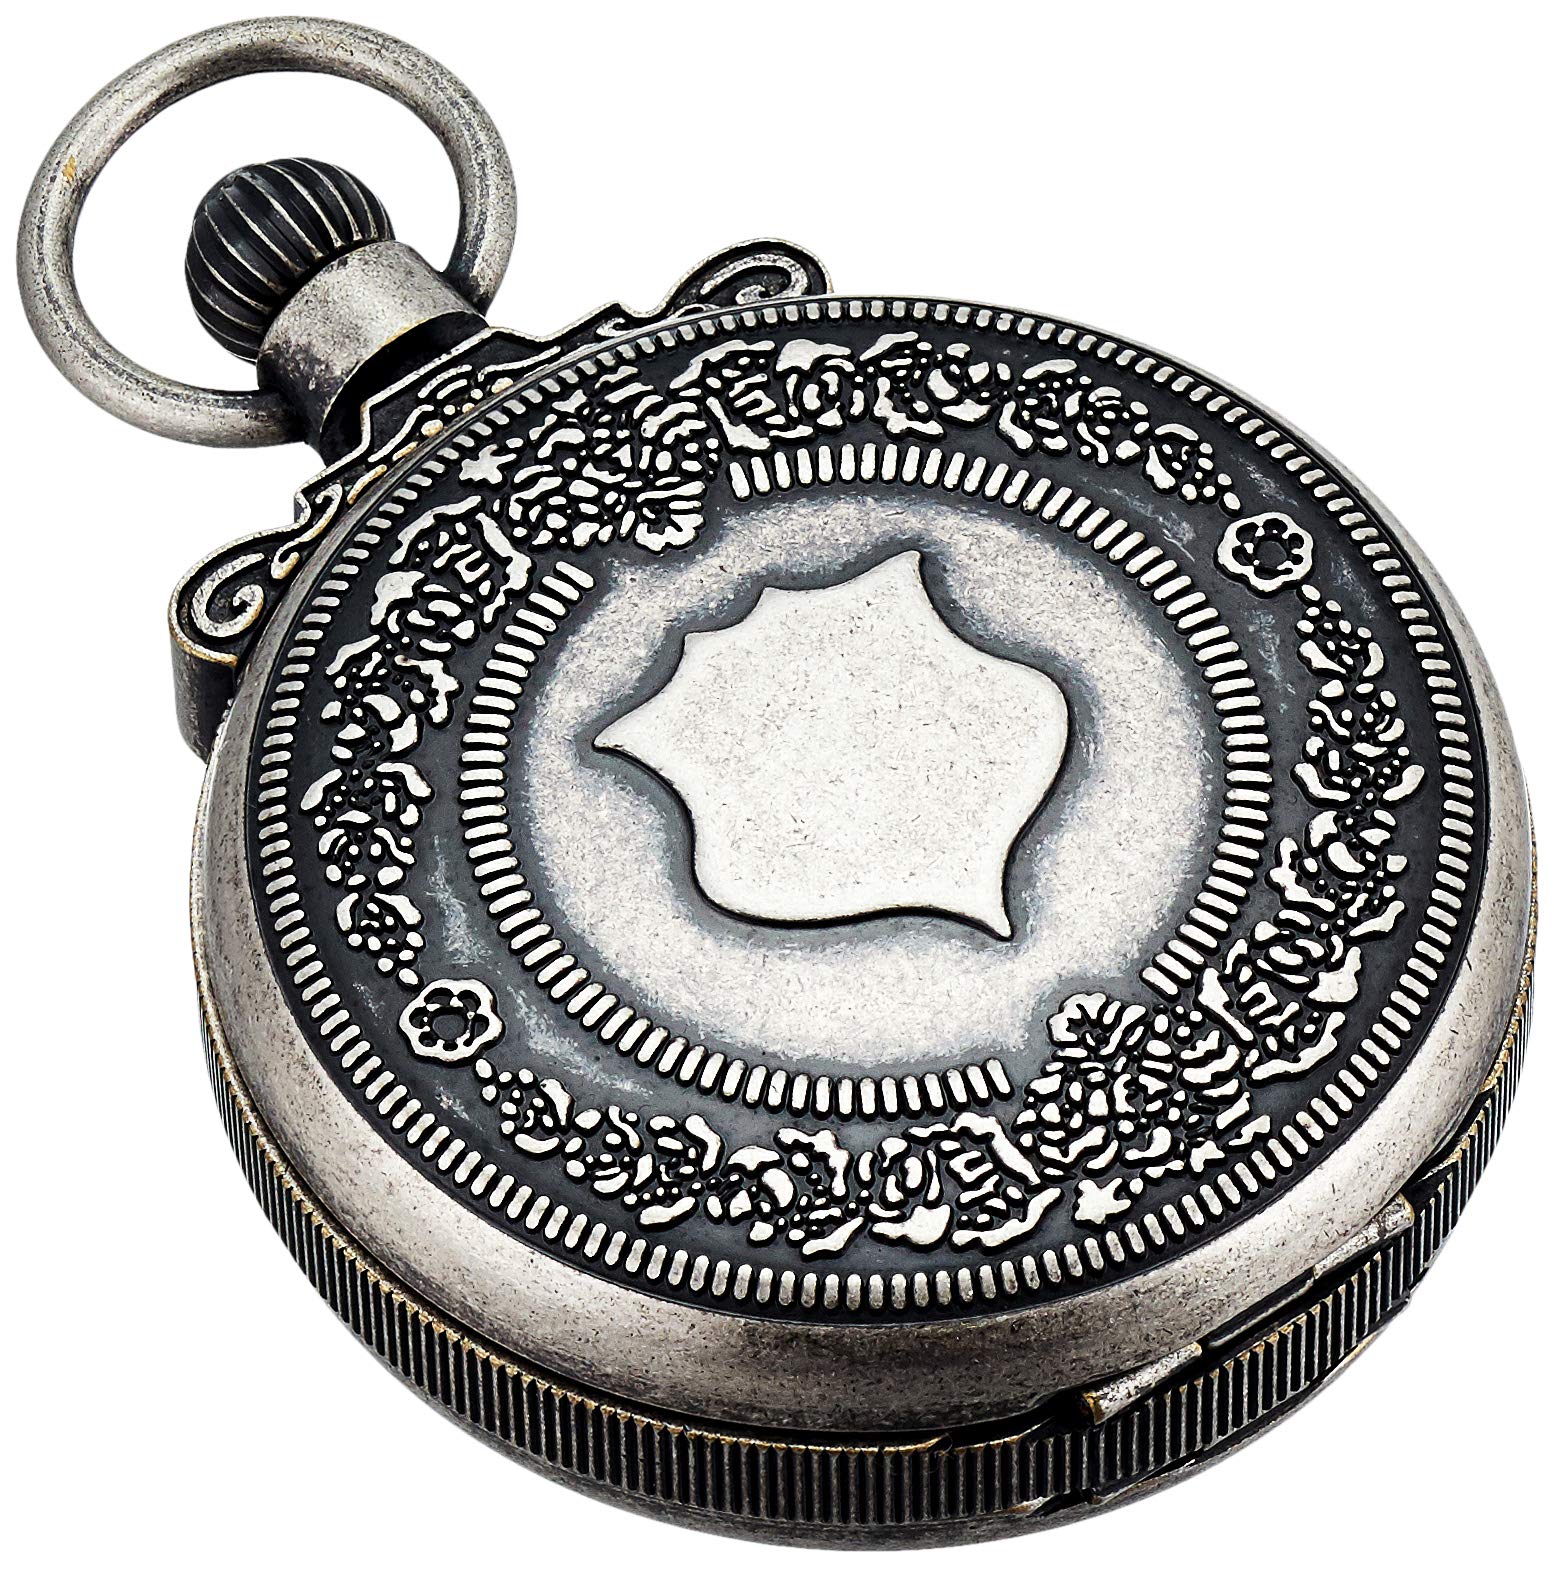 Charles-Hubert, Paris 3867-S Classic Collection Antiqued Finish Double Hunter Case Mechanical Pocket Watch